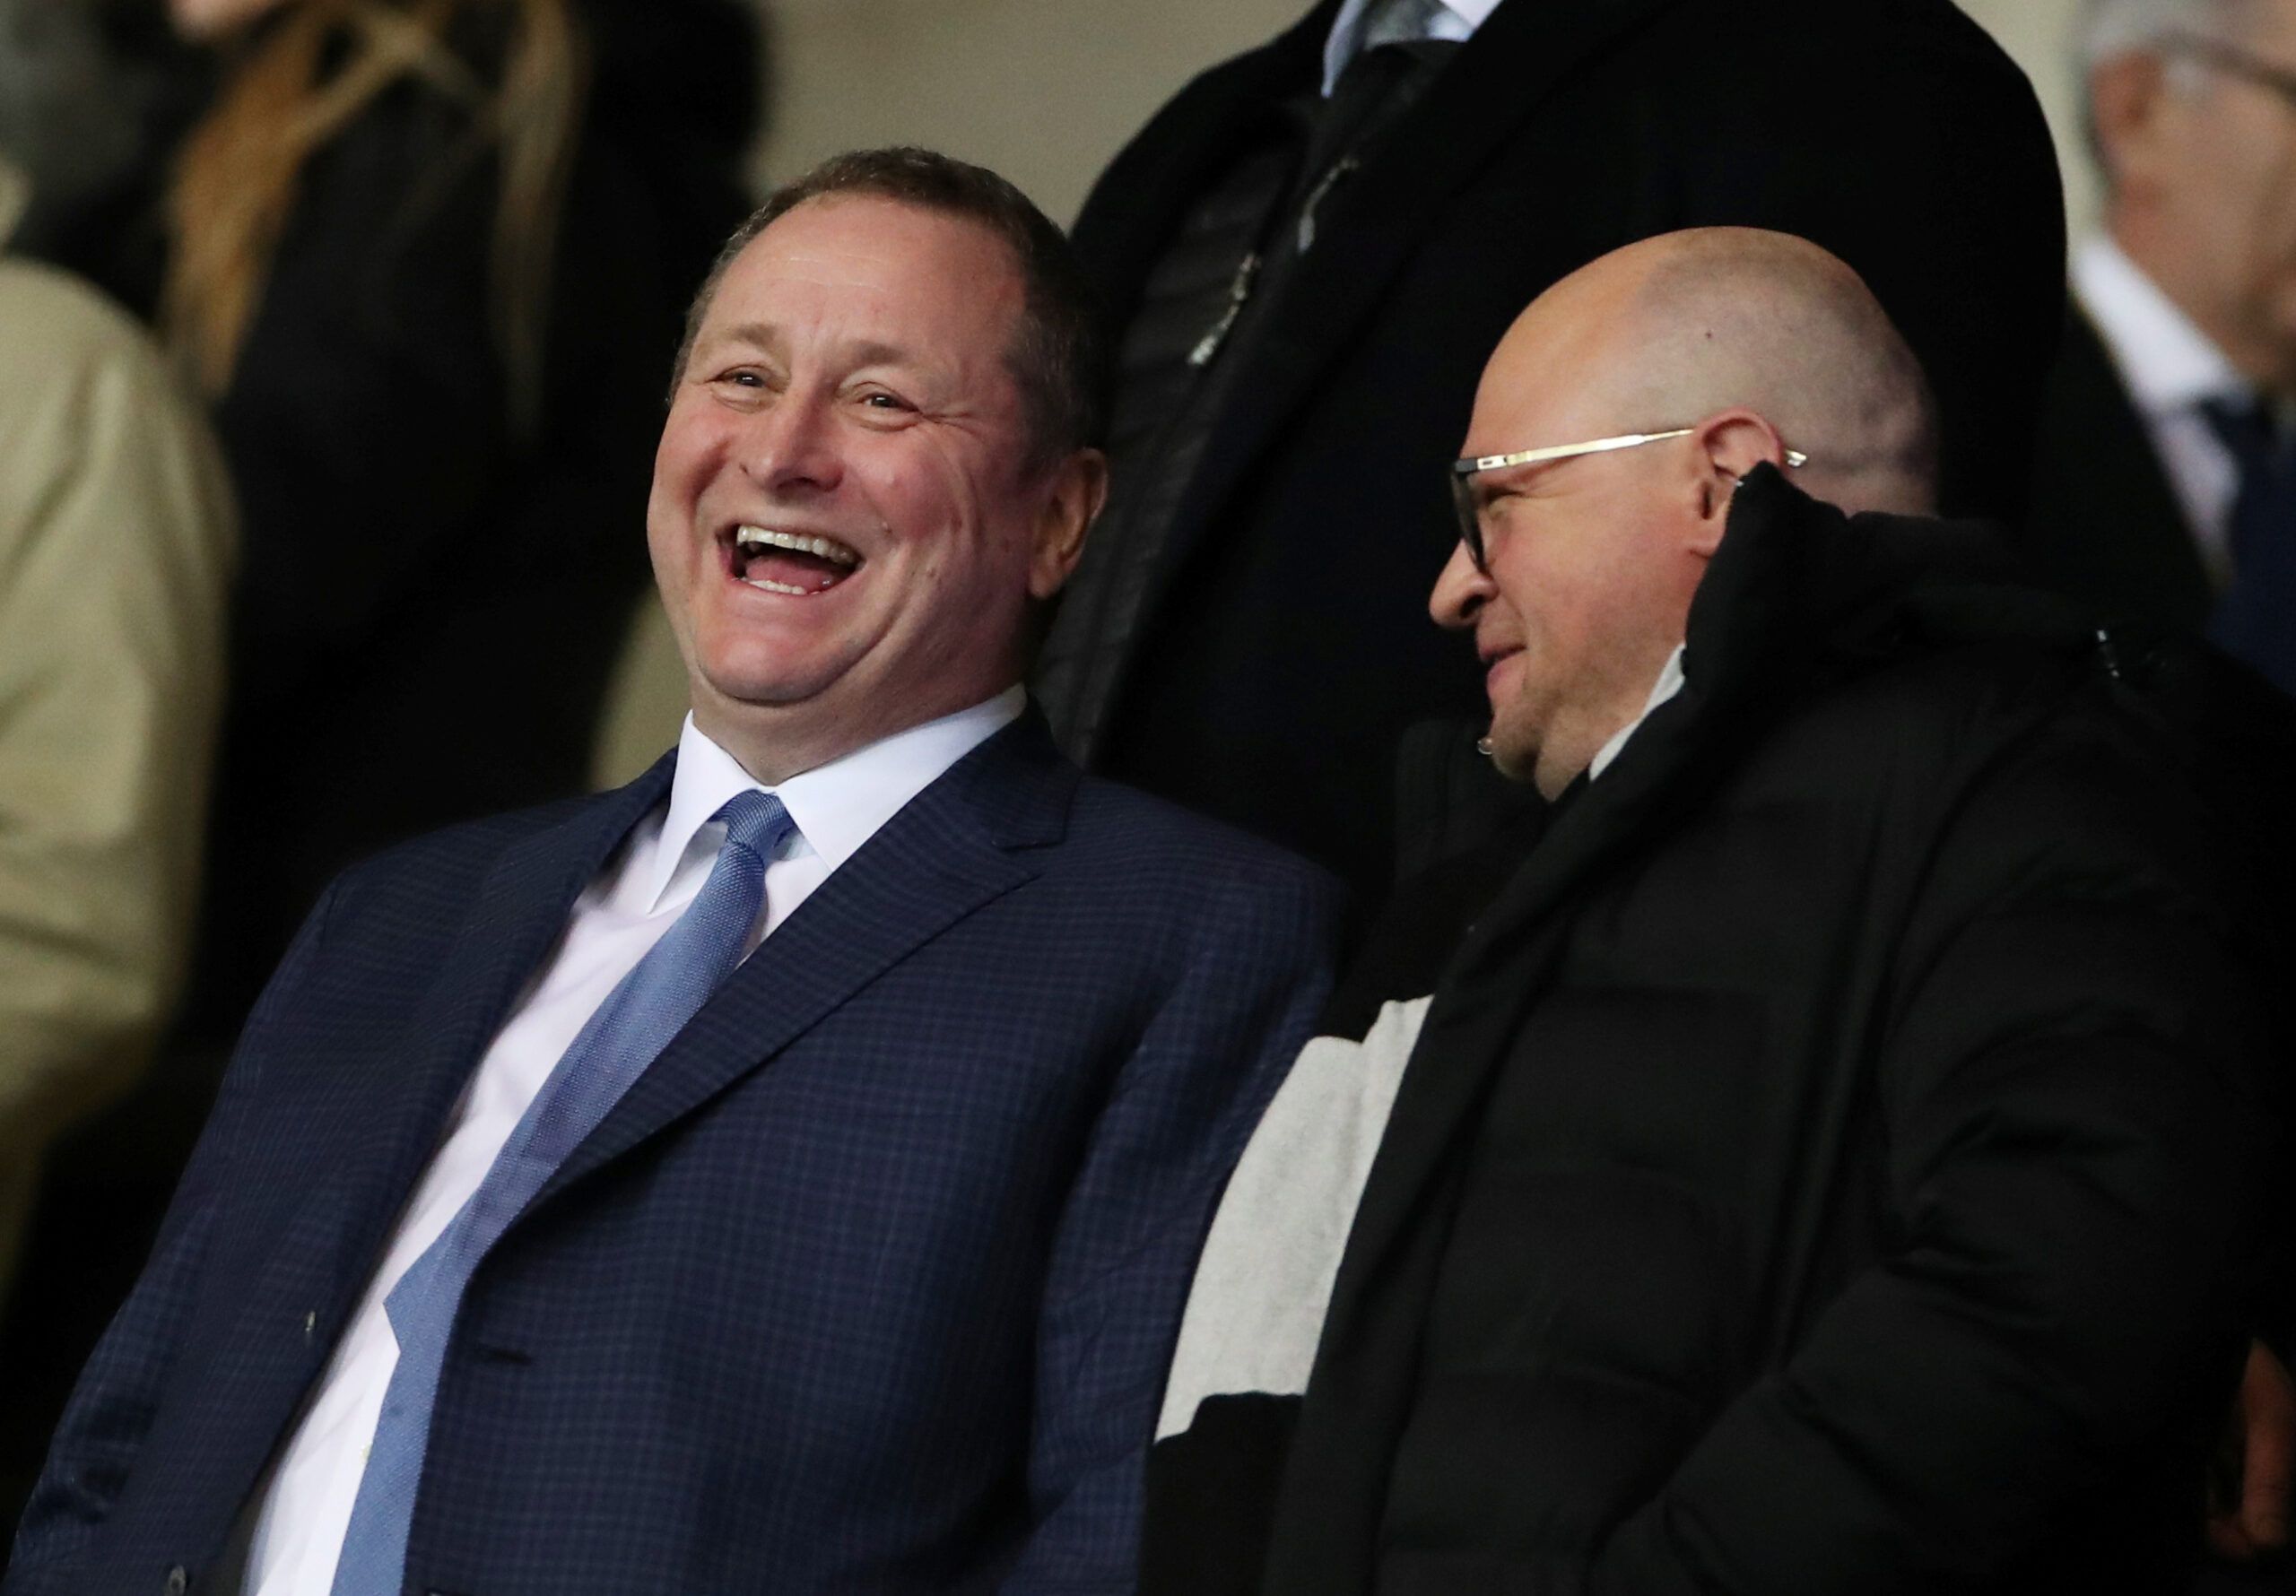 Soccer Football -  FA Cup Fourth Round Replay - Oxford United v Newcastle United  - Kassam Stadium, Oxford, Britain - February 4, 2020  Newcastle United owner Mike Ashley and managing director Lee Charnley in the stands before the match     REUTERS/David Klein